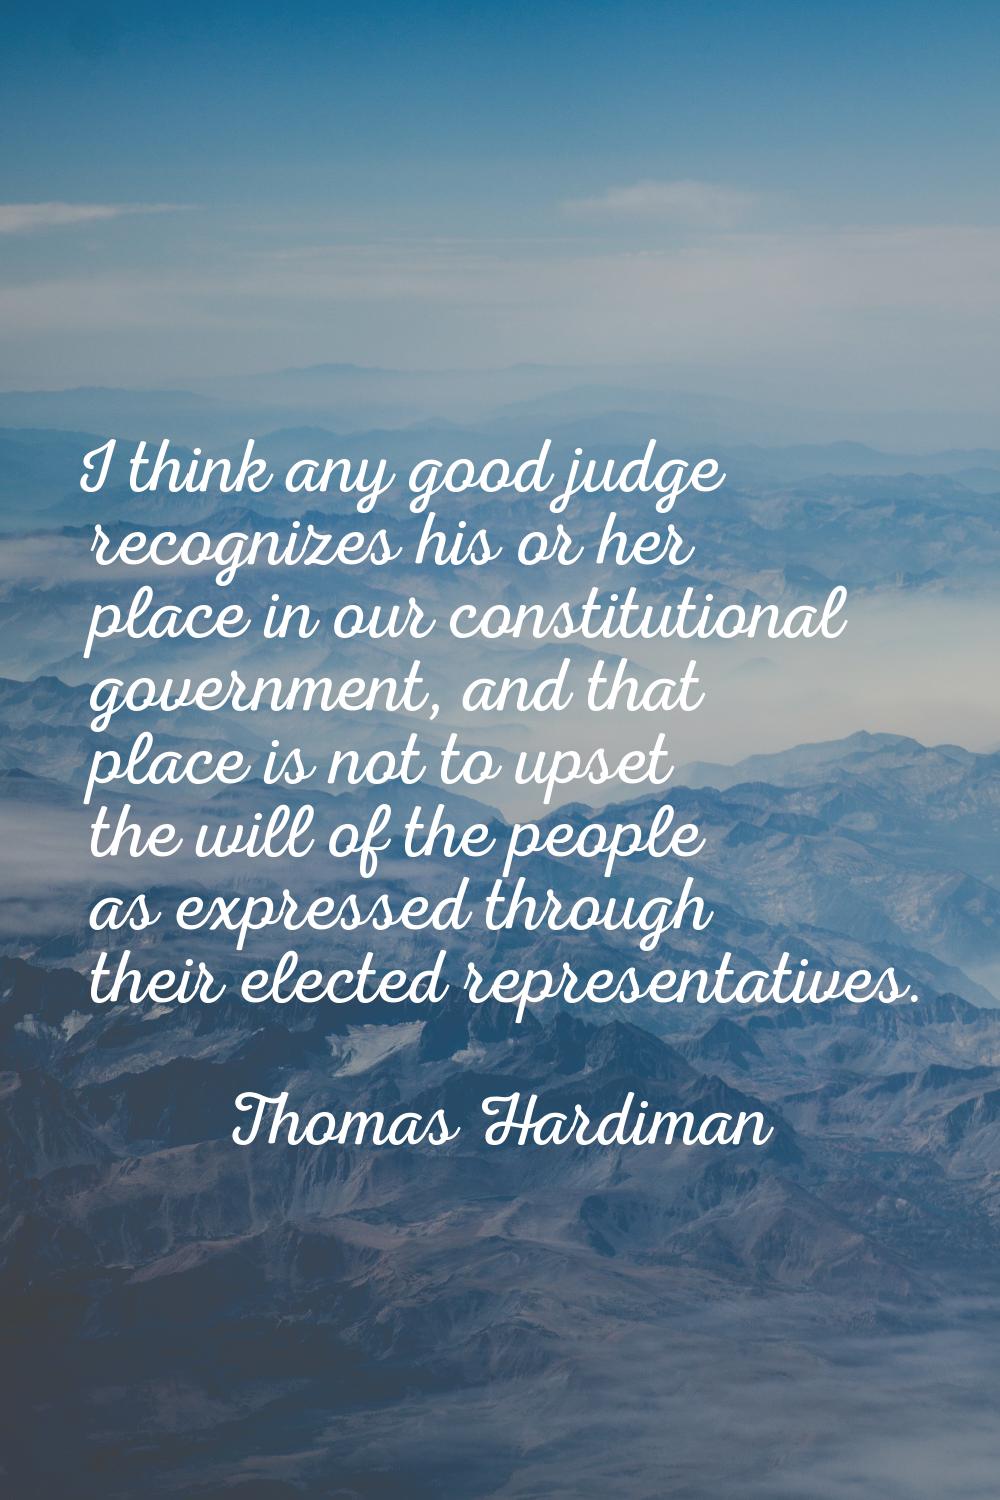 I think any good judge recognizes his or her place in our constitutional government, and that place